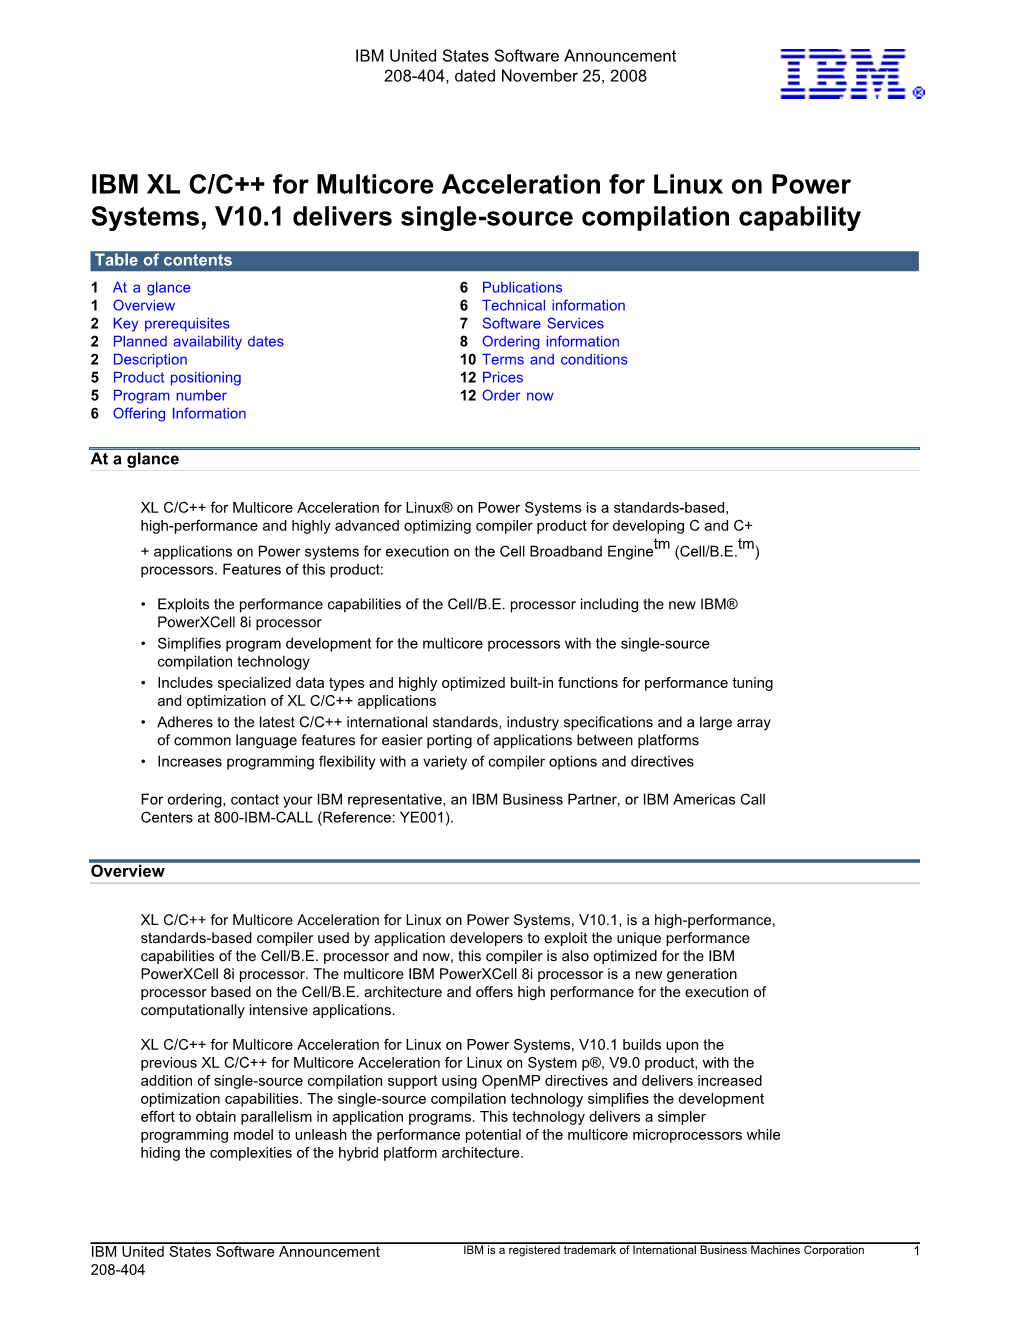 IBM XL C/C++ for Multicore Acceleration for Linux on Power Systems, V10.1 Delivers Single-Source Compilation Capability